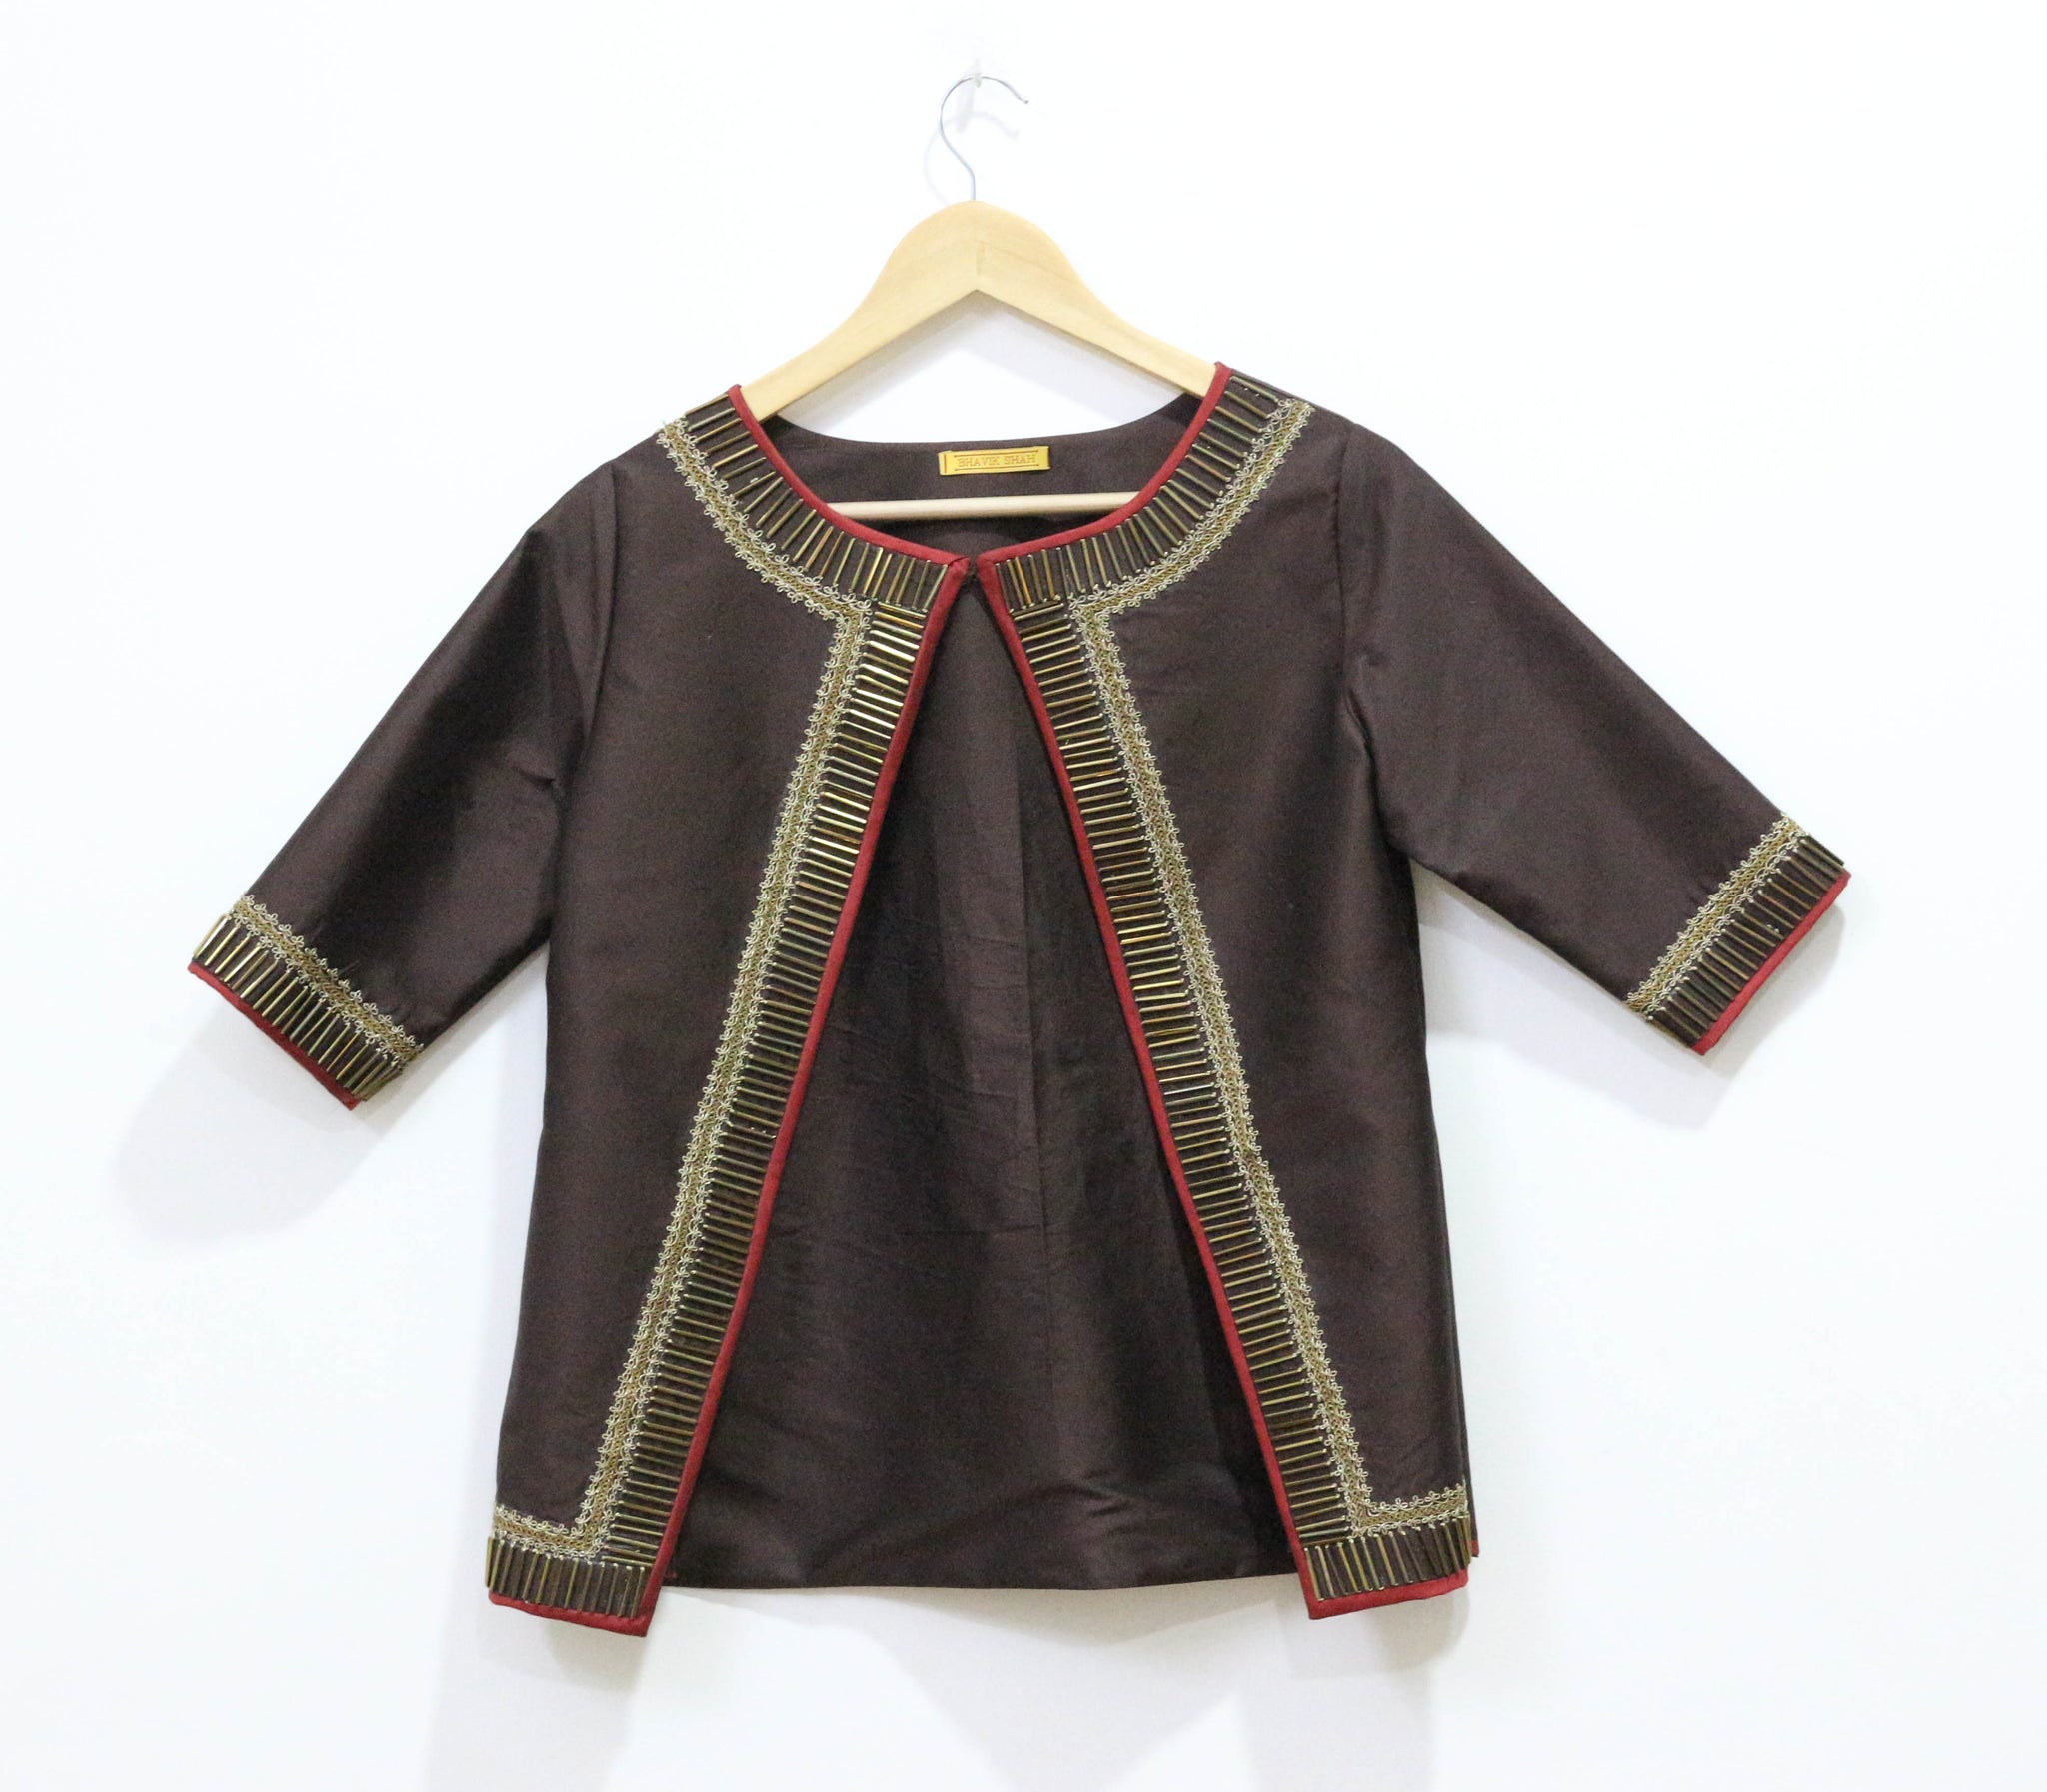 Hand Embroidered Chocolate Brown Jacket